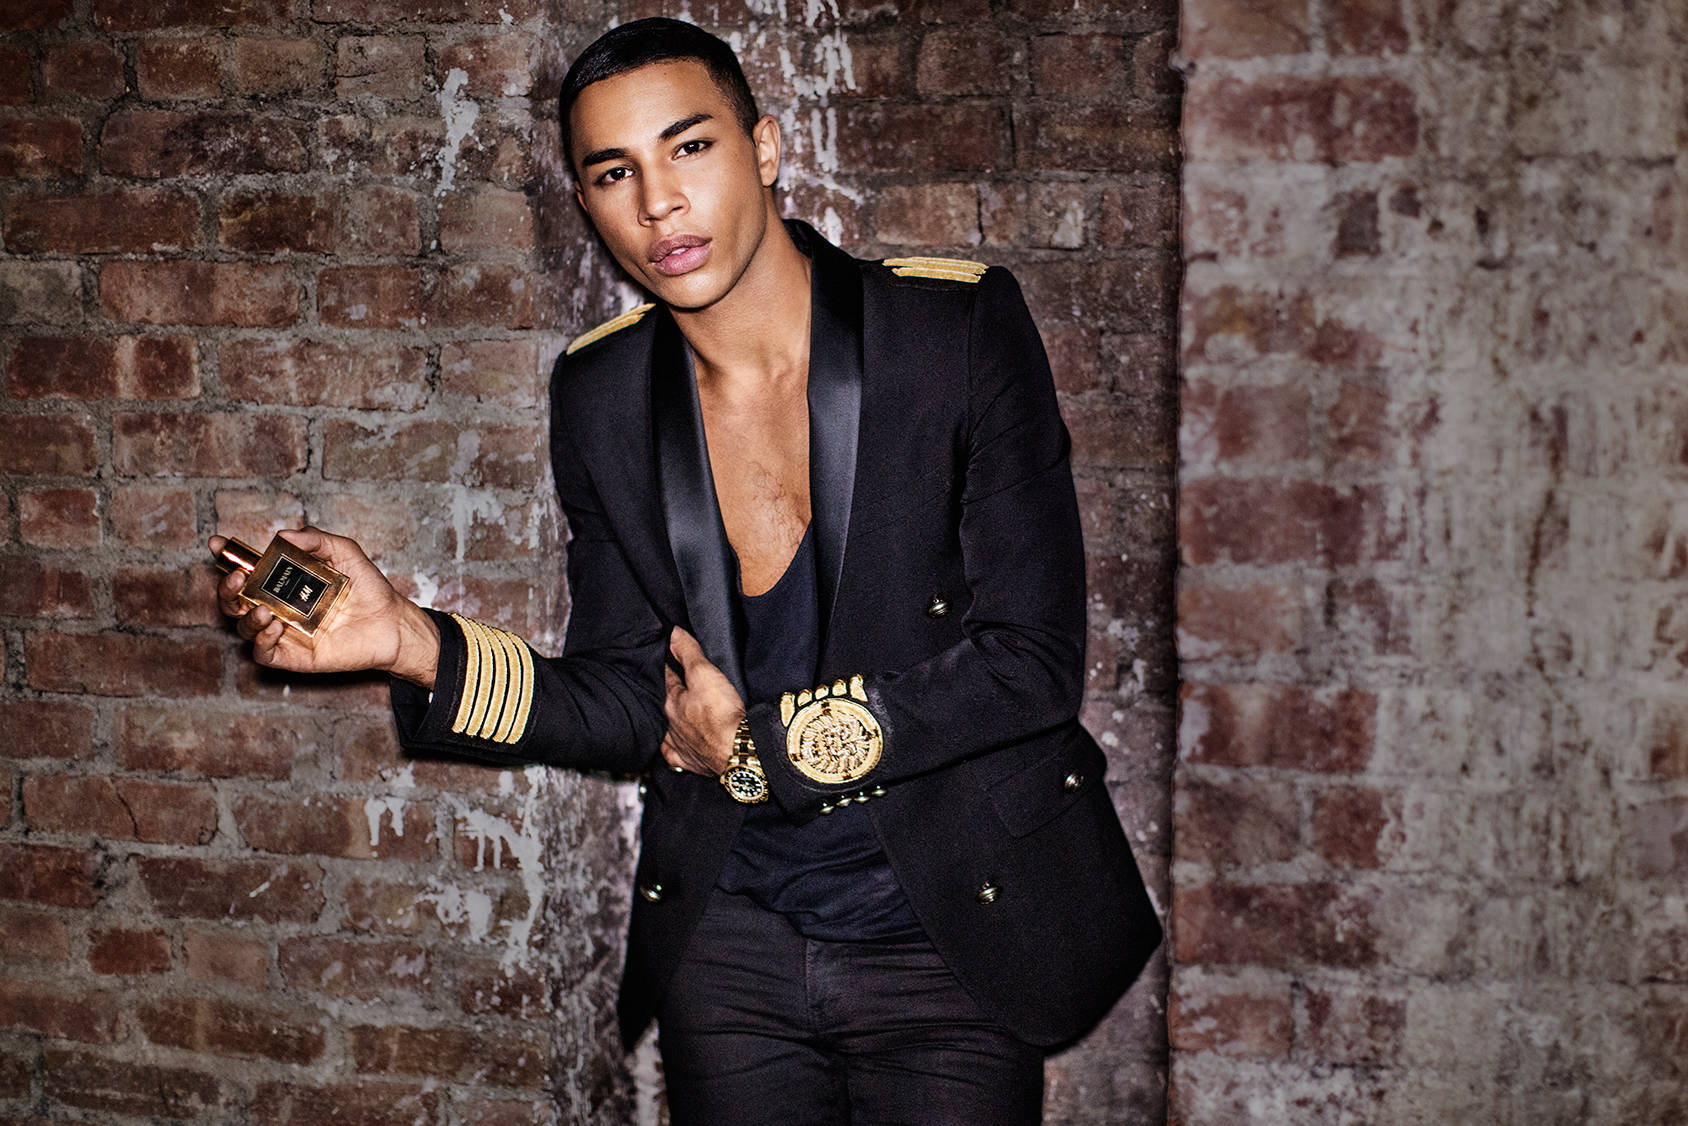 Balmain for H&M: Limited Edition Fragrance